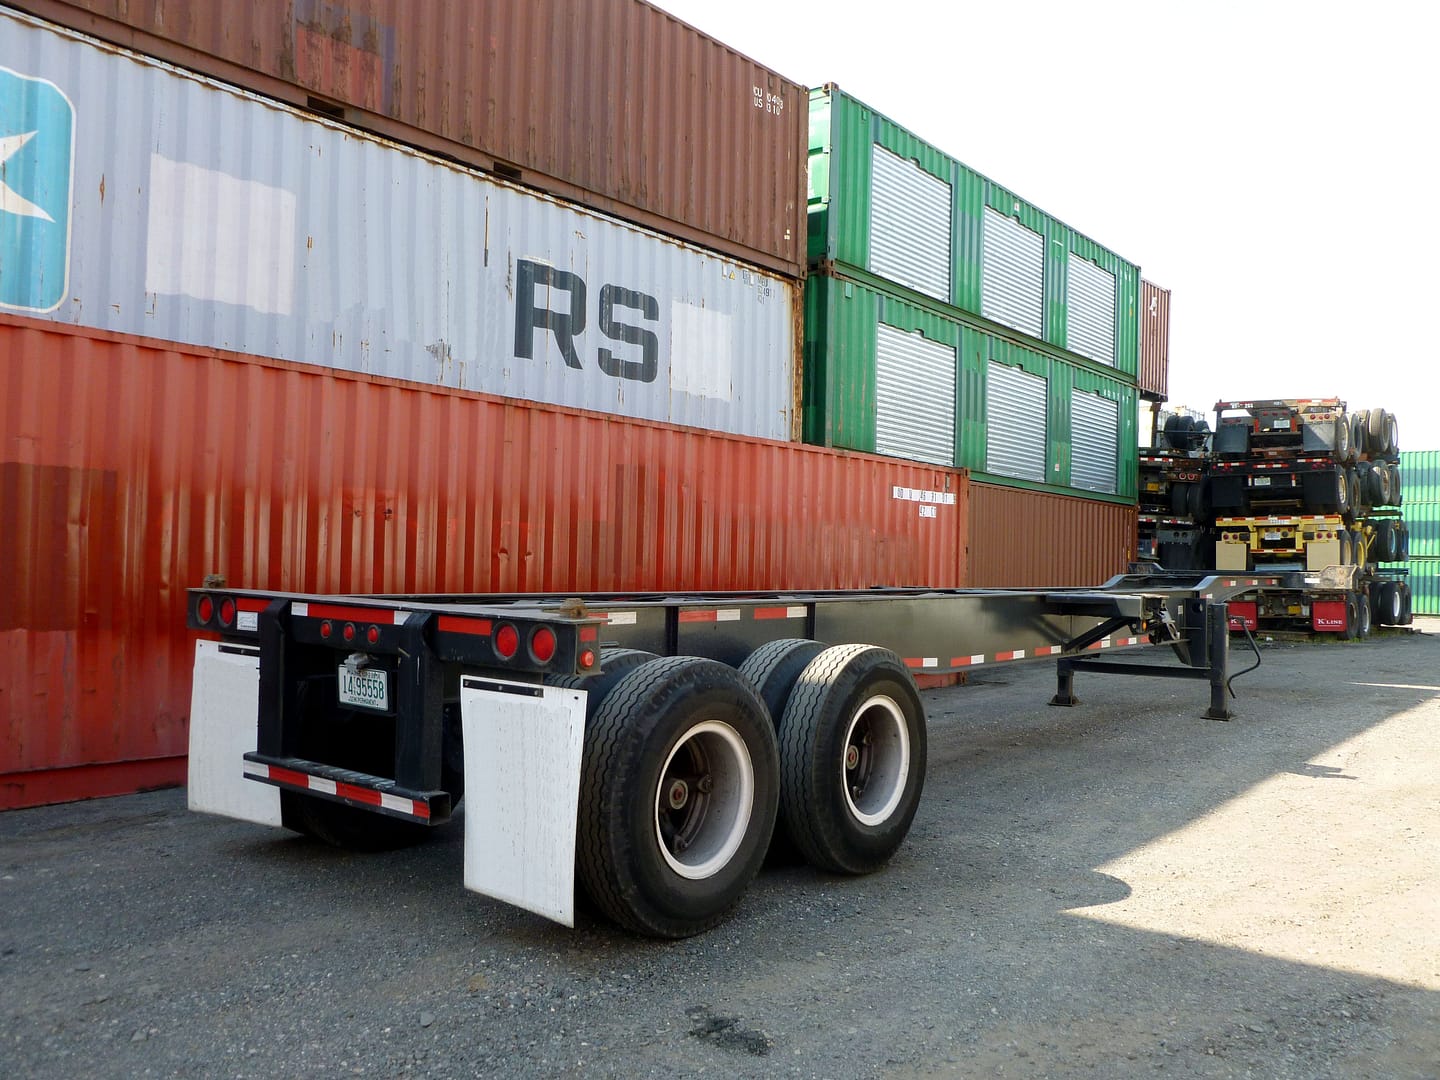 TRS Containers sells rents repairs stores stacks and delivers 8-pin lock chassis